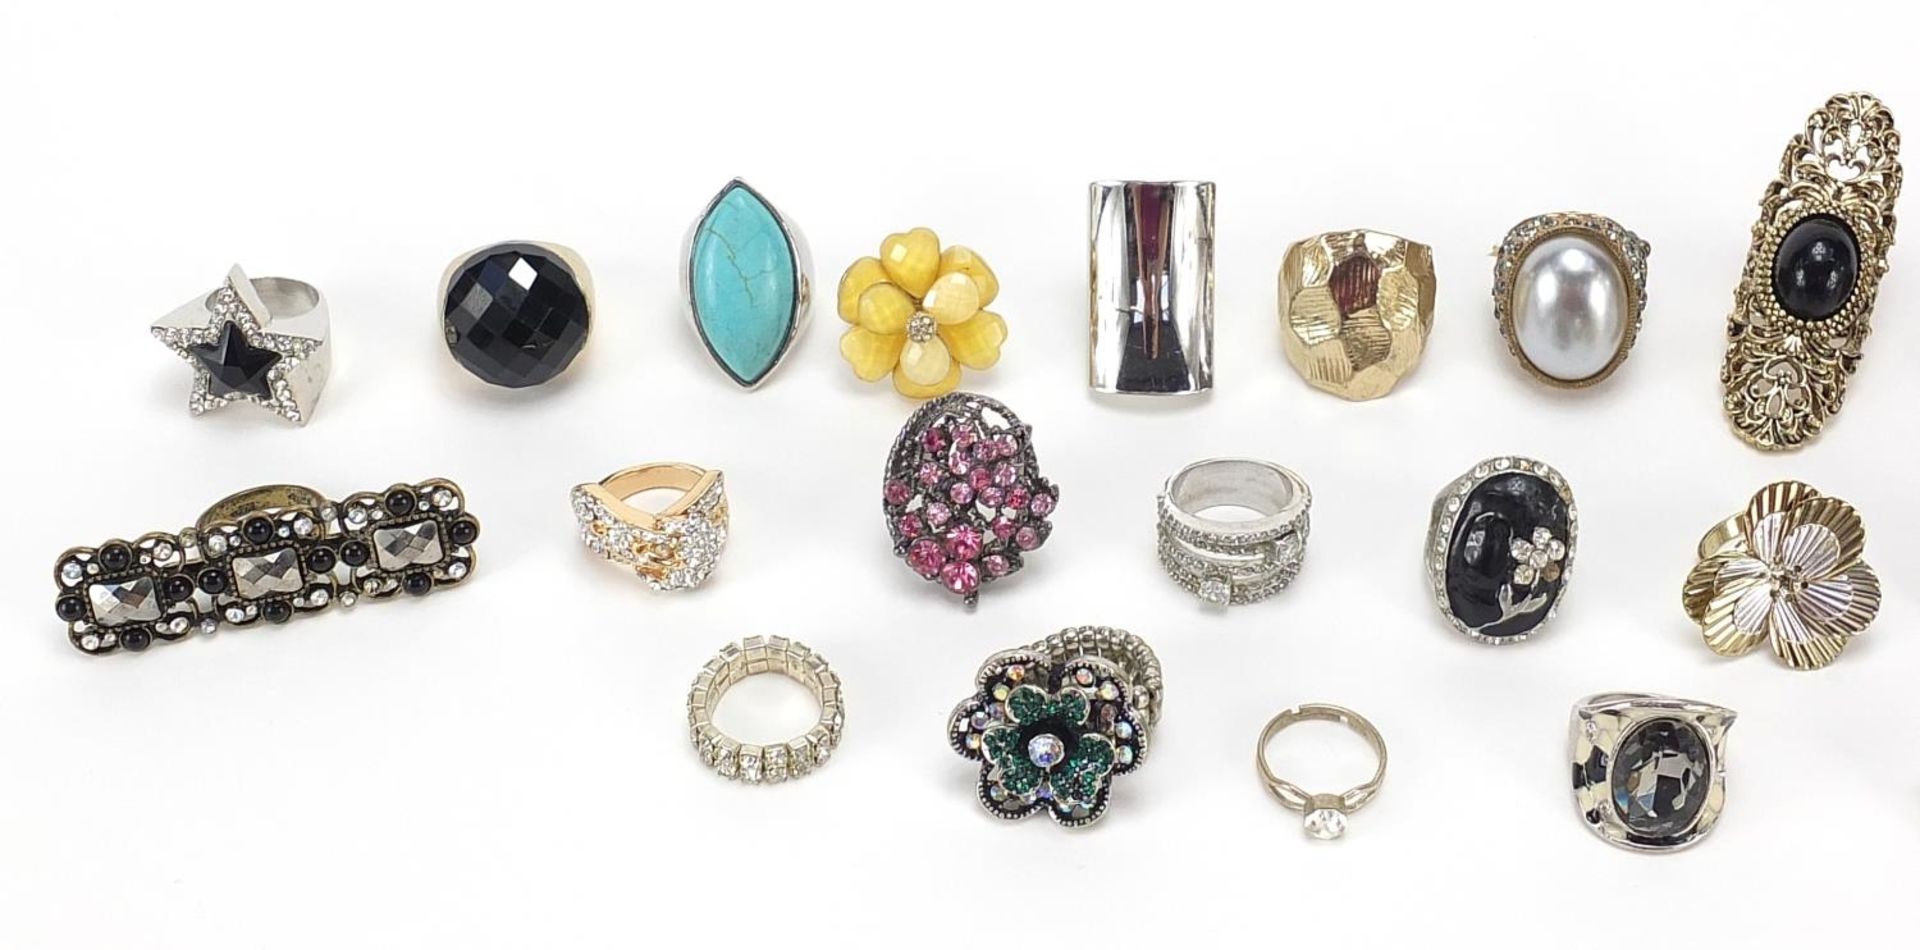 Selection of costume jewellery rings including some with semi precious stones and glass - Image 2 of 3